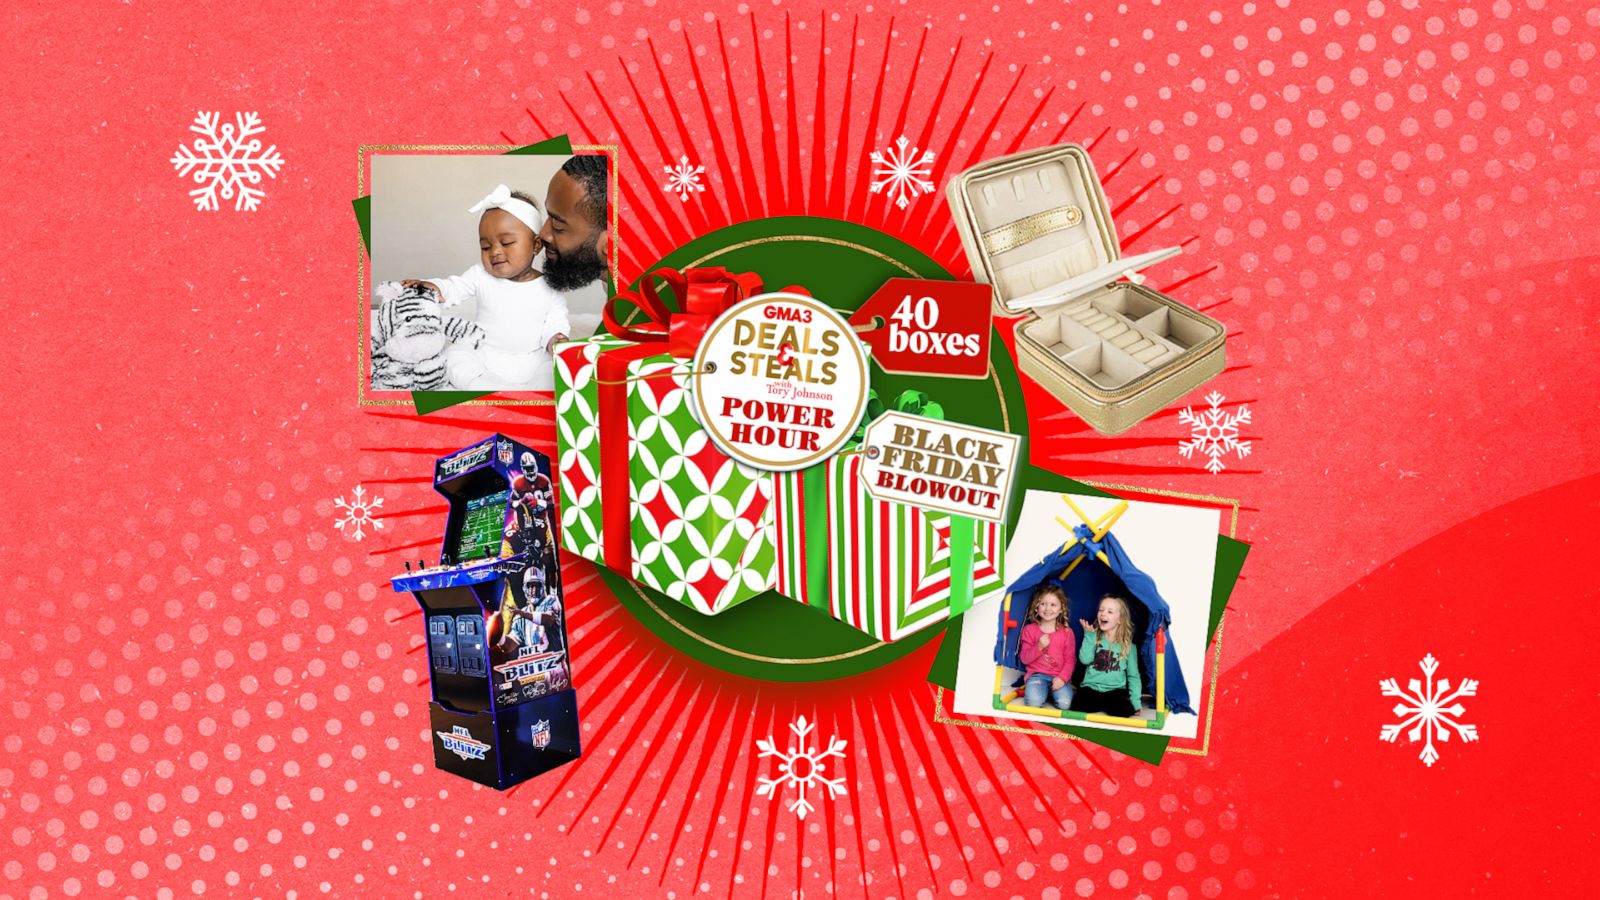 GMA3' Deals & Steals x 40 Boxes Holiday Power Hour - Good Morning